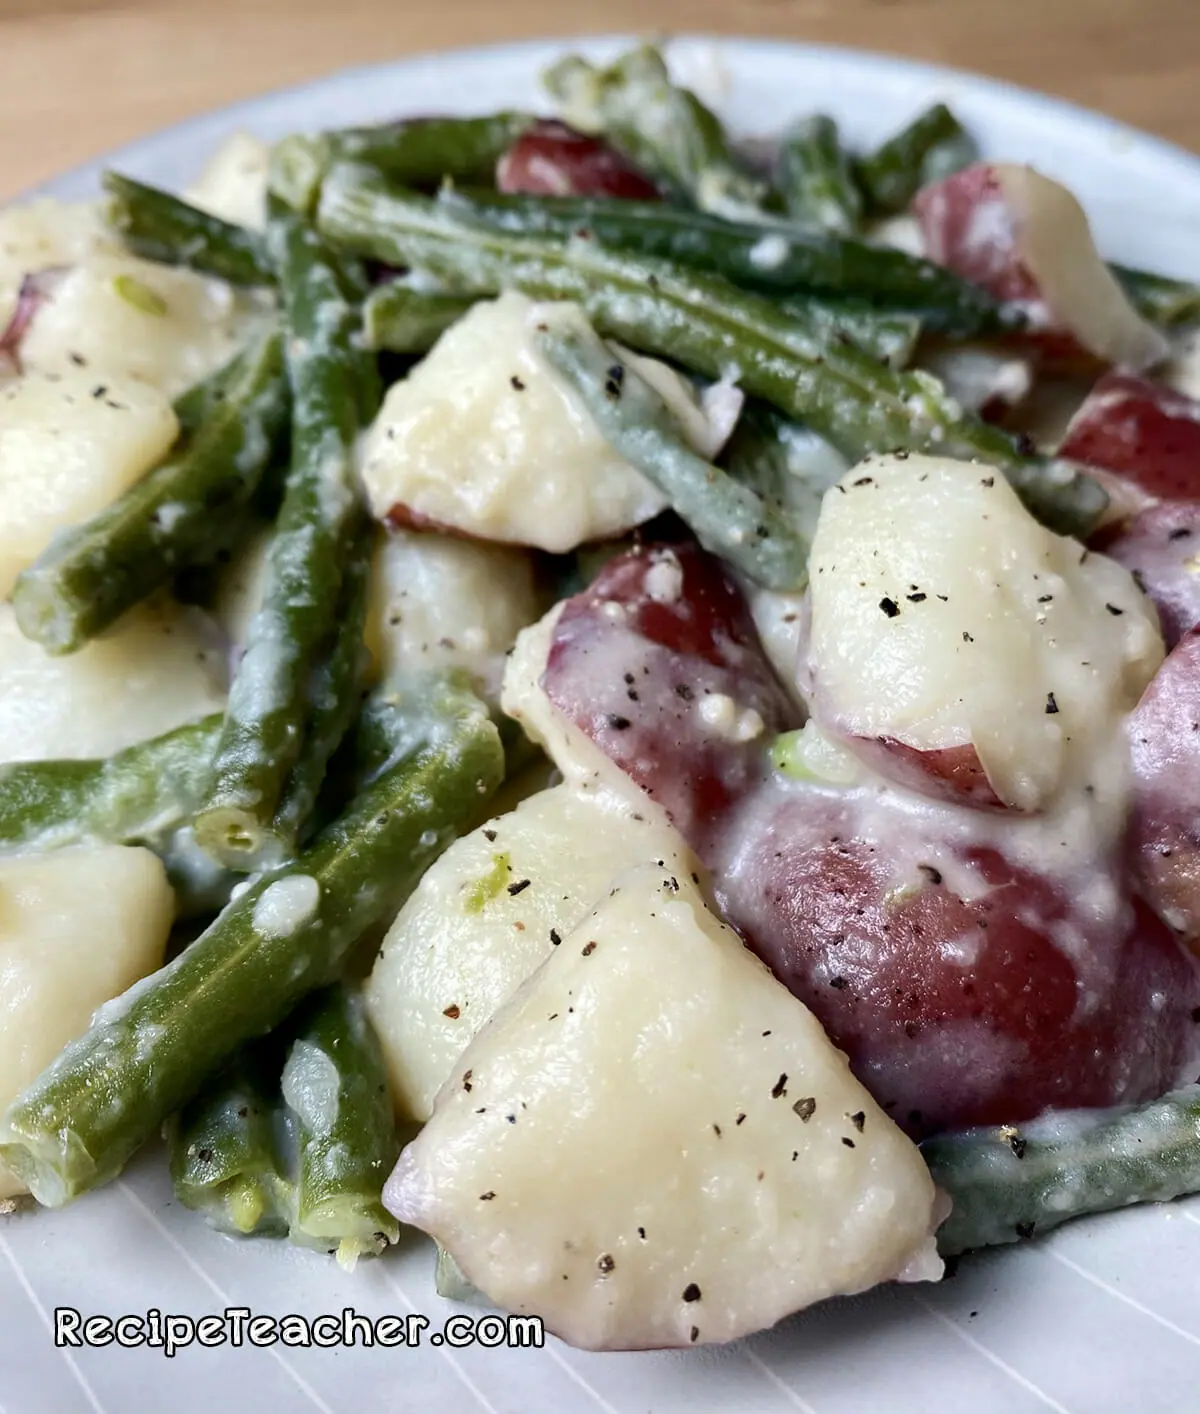 Recipe for Instant Pot potatoes and green beans in a creamy garlic Parmesan sauce.